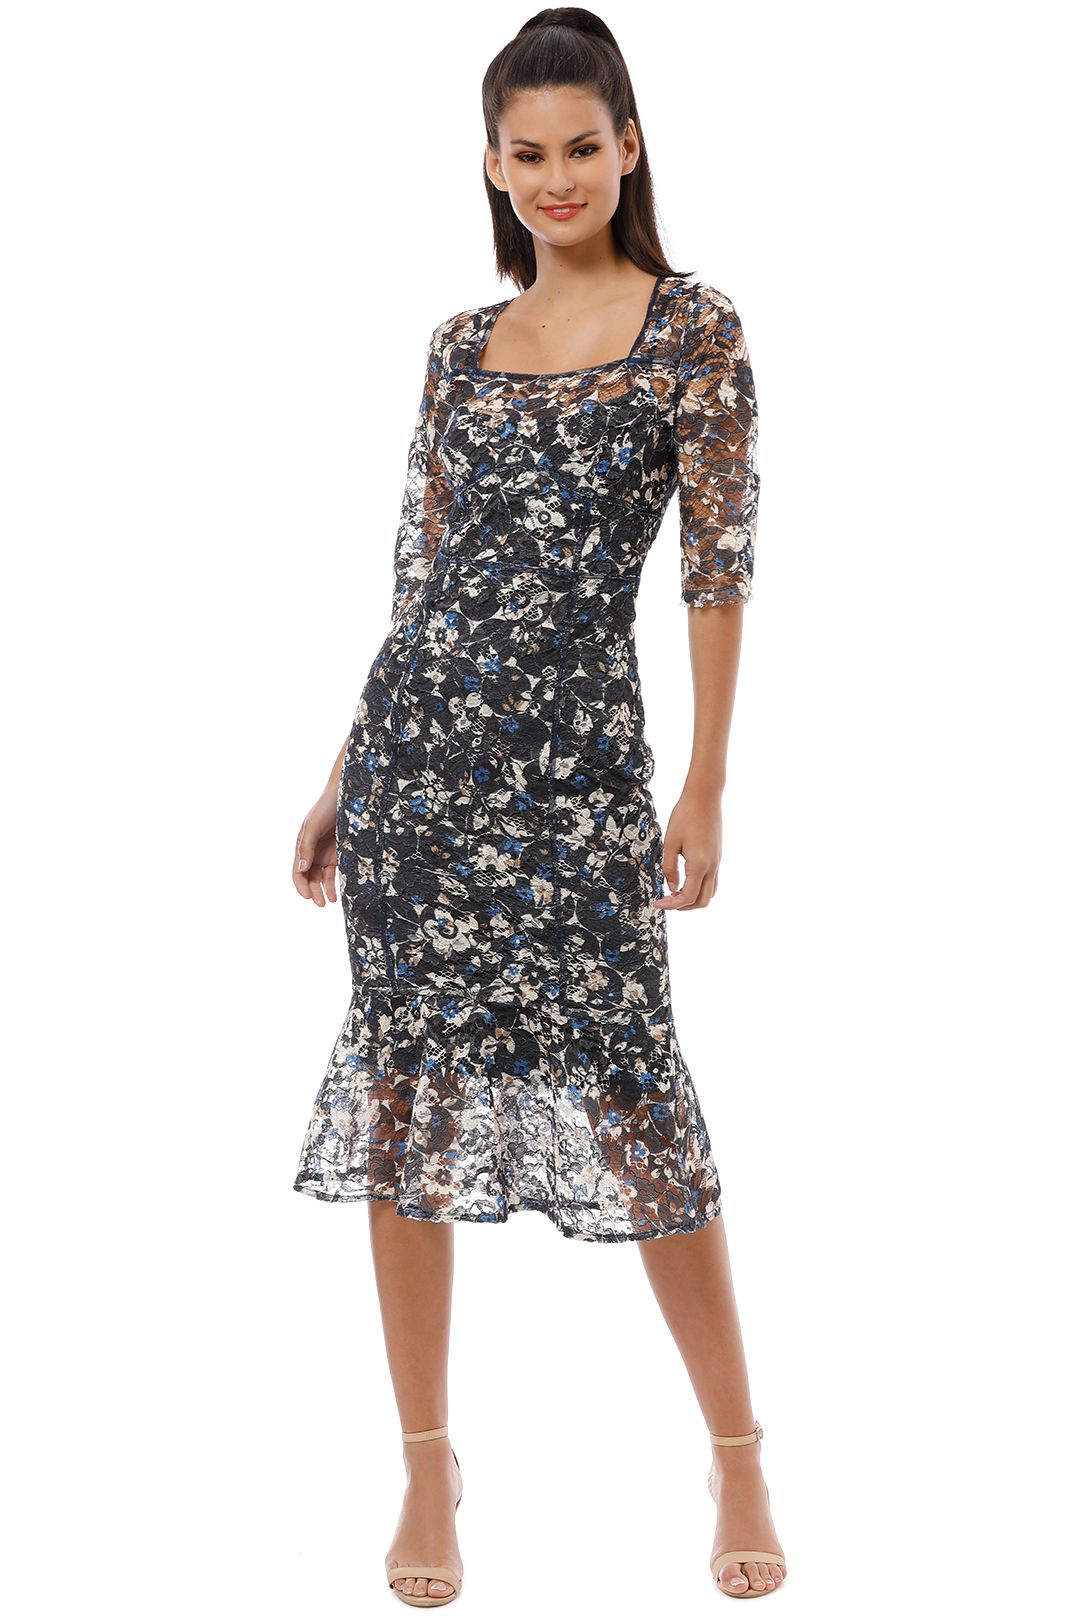 Moss and Spy - Frida Dress - Multi - Front